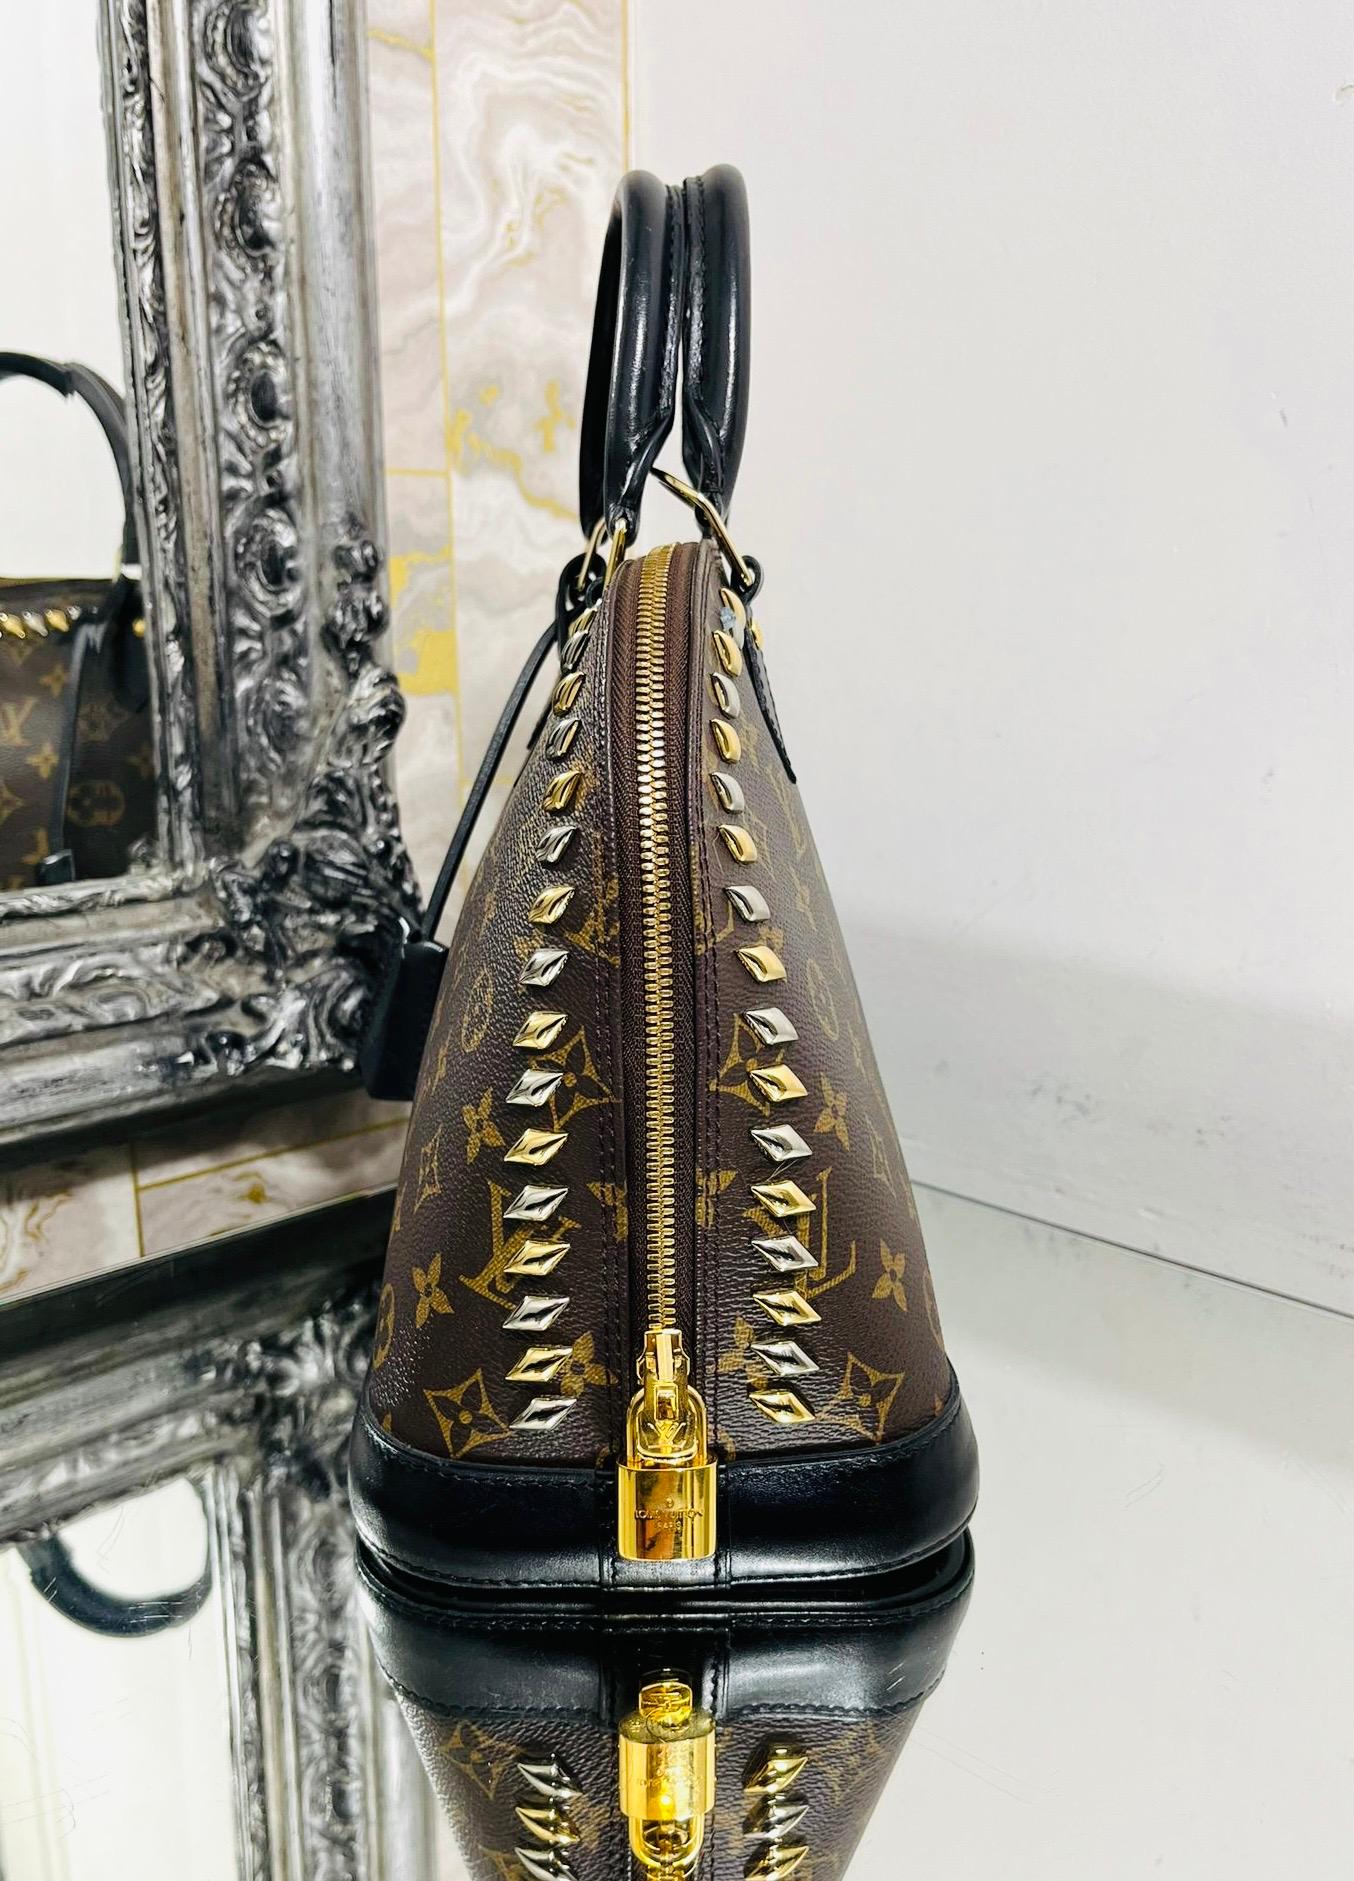 Louis Vuitton Cruise Runway Monogram Macassar Studded Alma Bag In Good Condition For Sale In London, GB